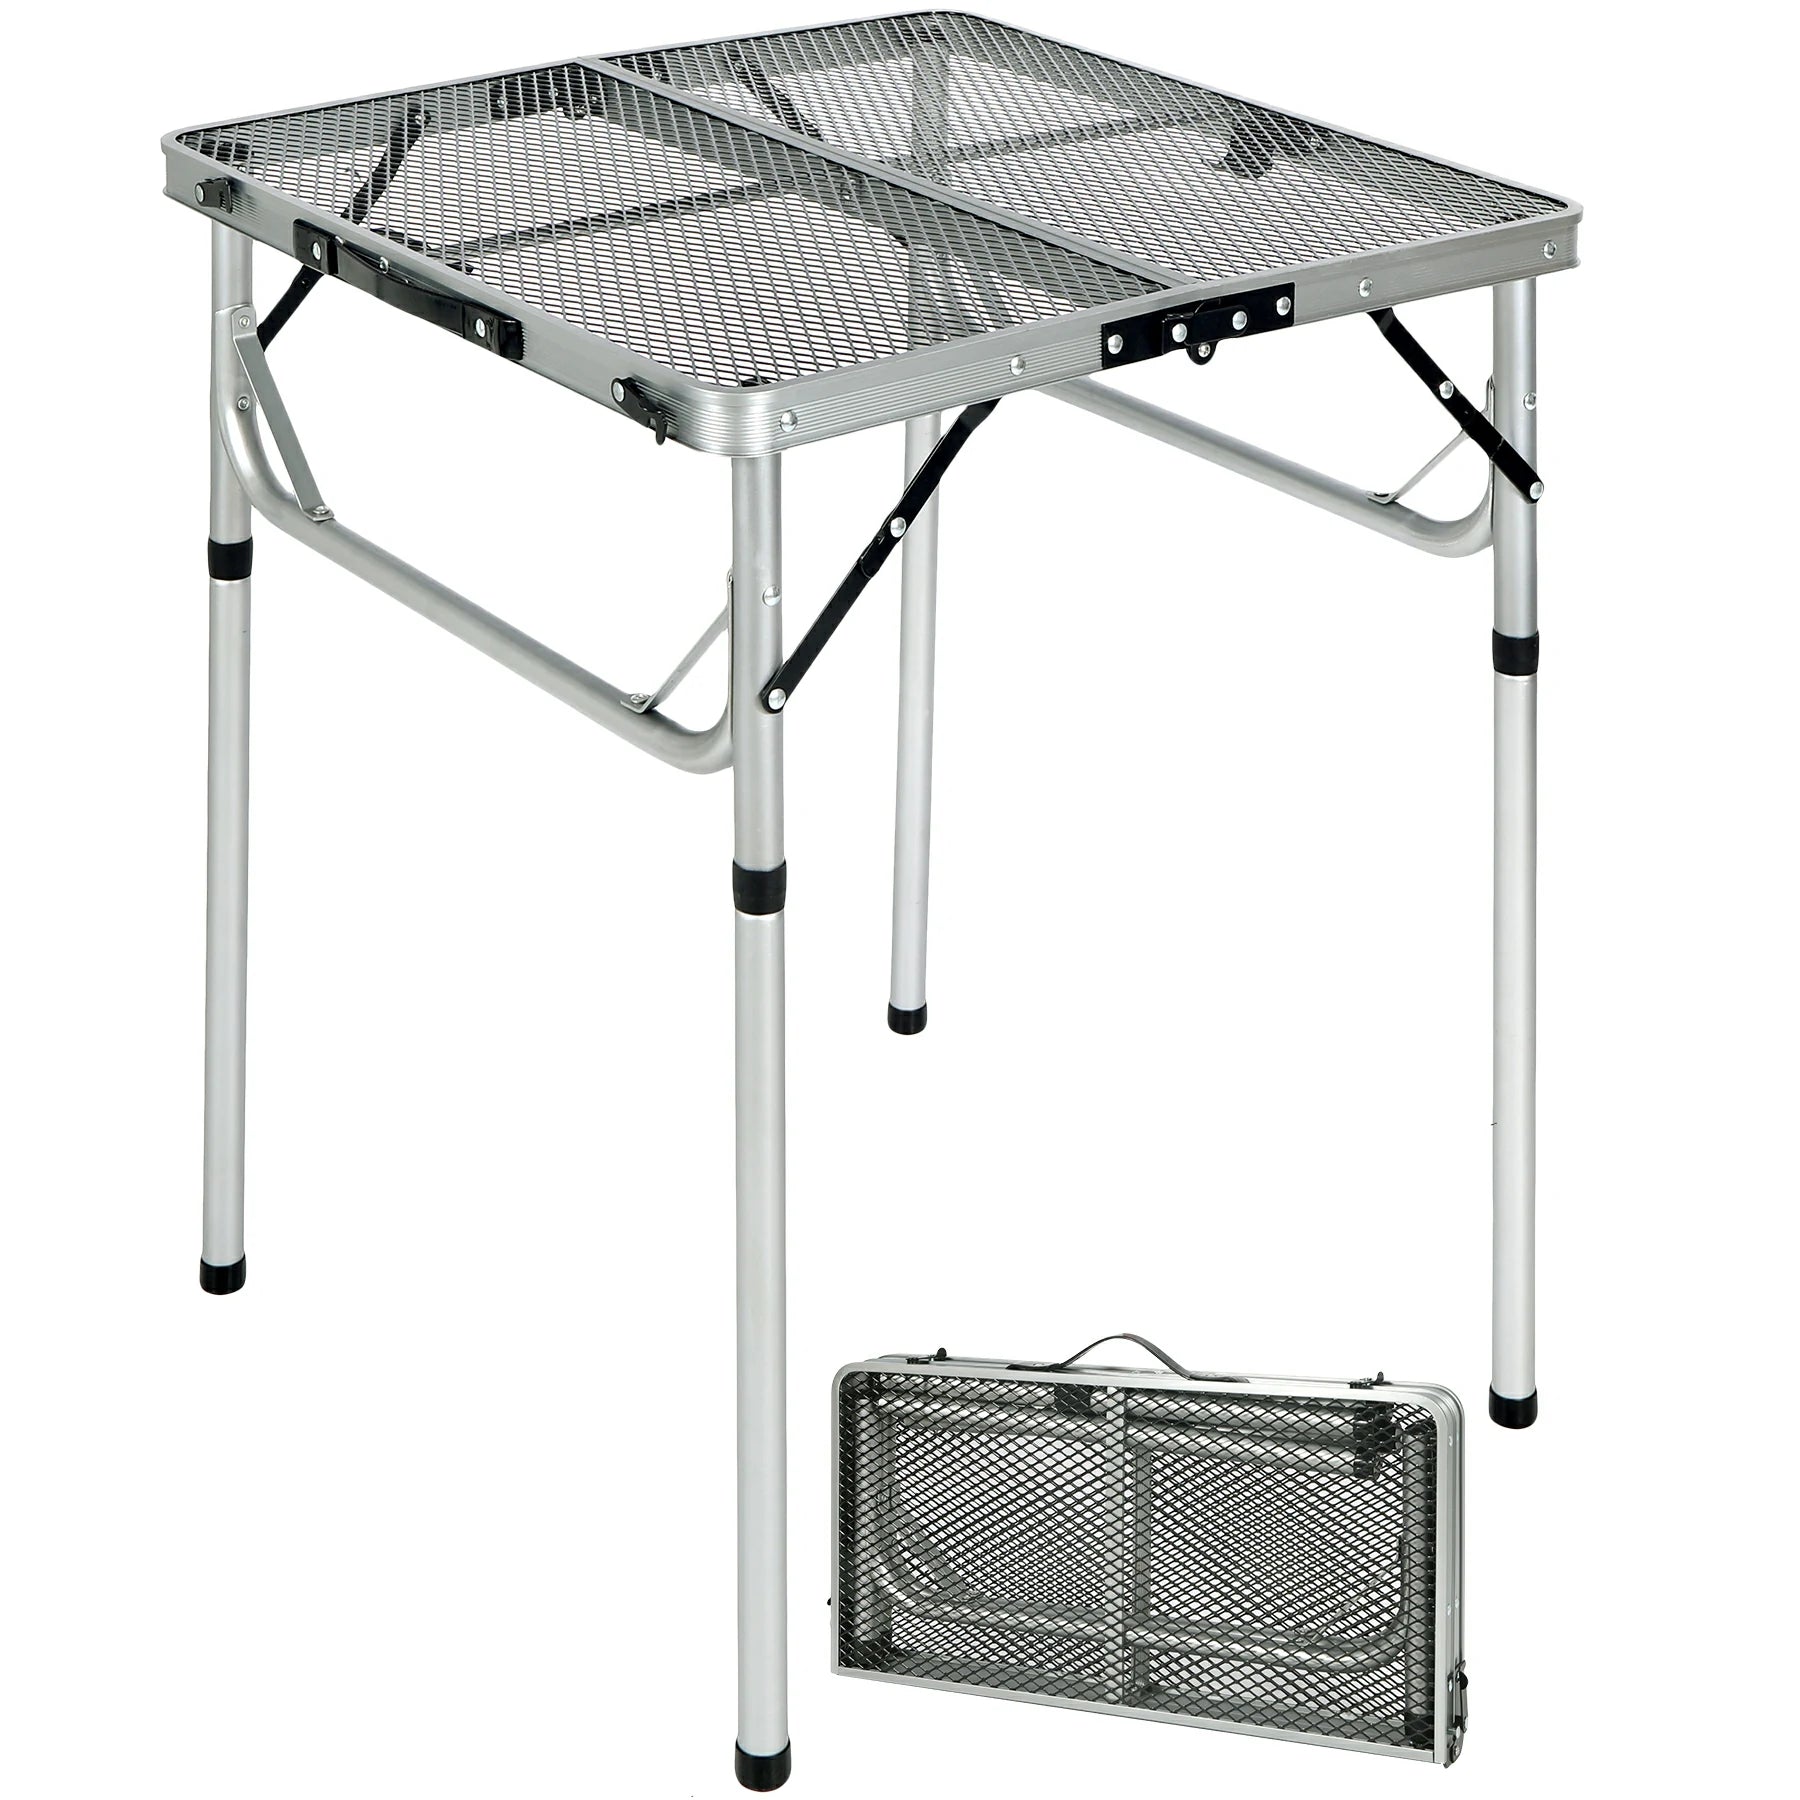 Folding Grill Table for Camping with Mesh Desktop